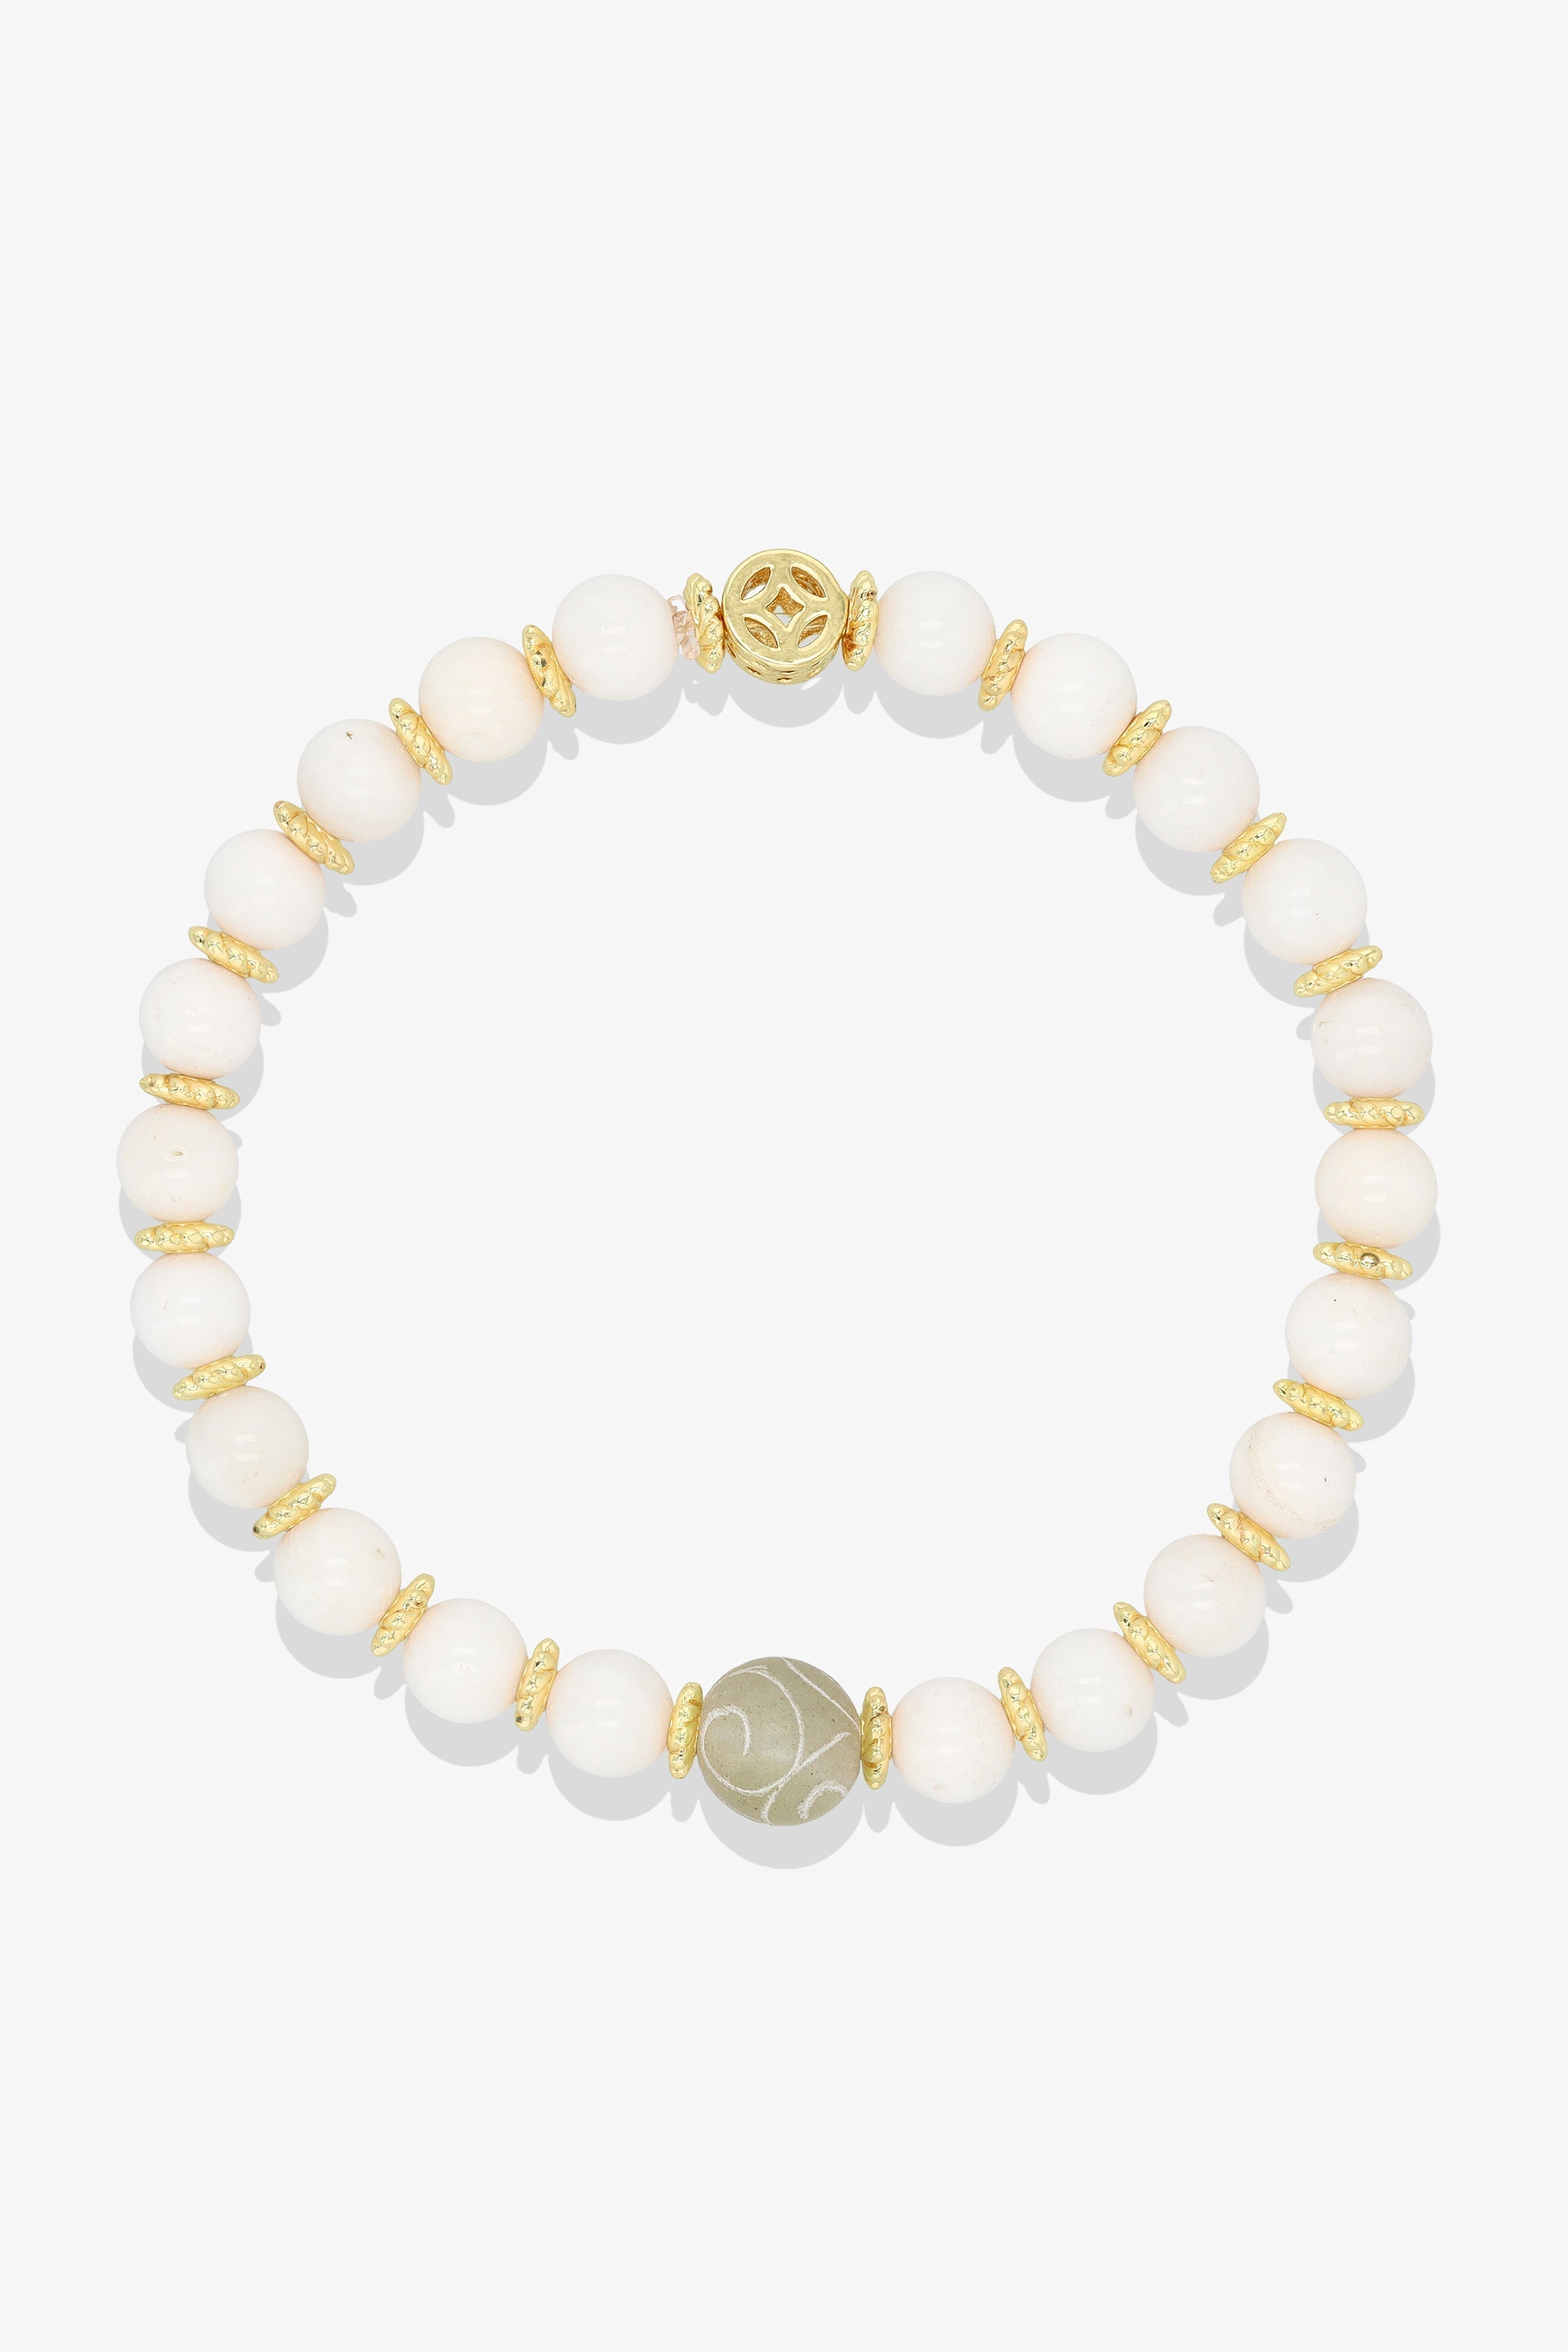 Jade with Gold Lucky Coin and White Jade charm Bracelet